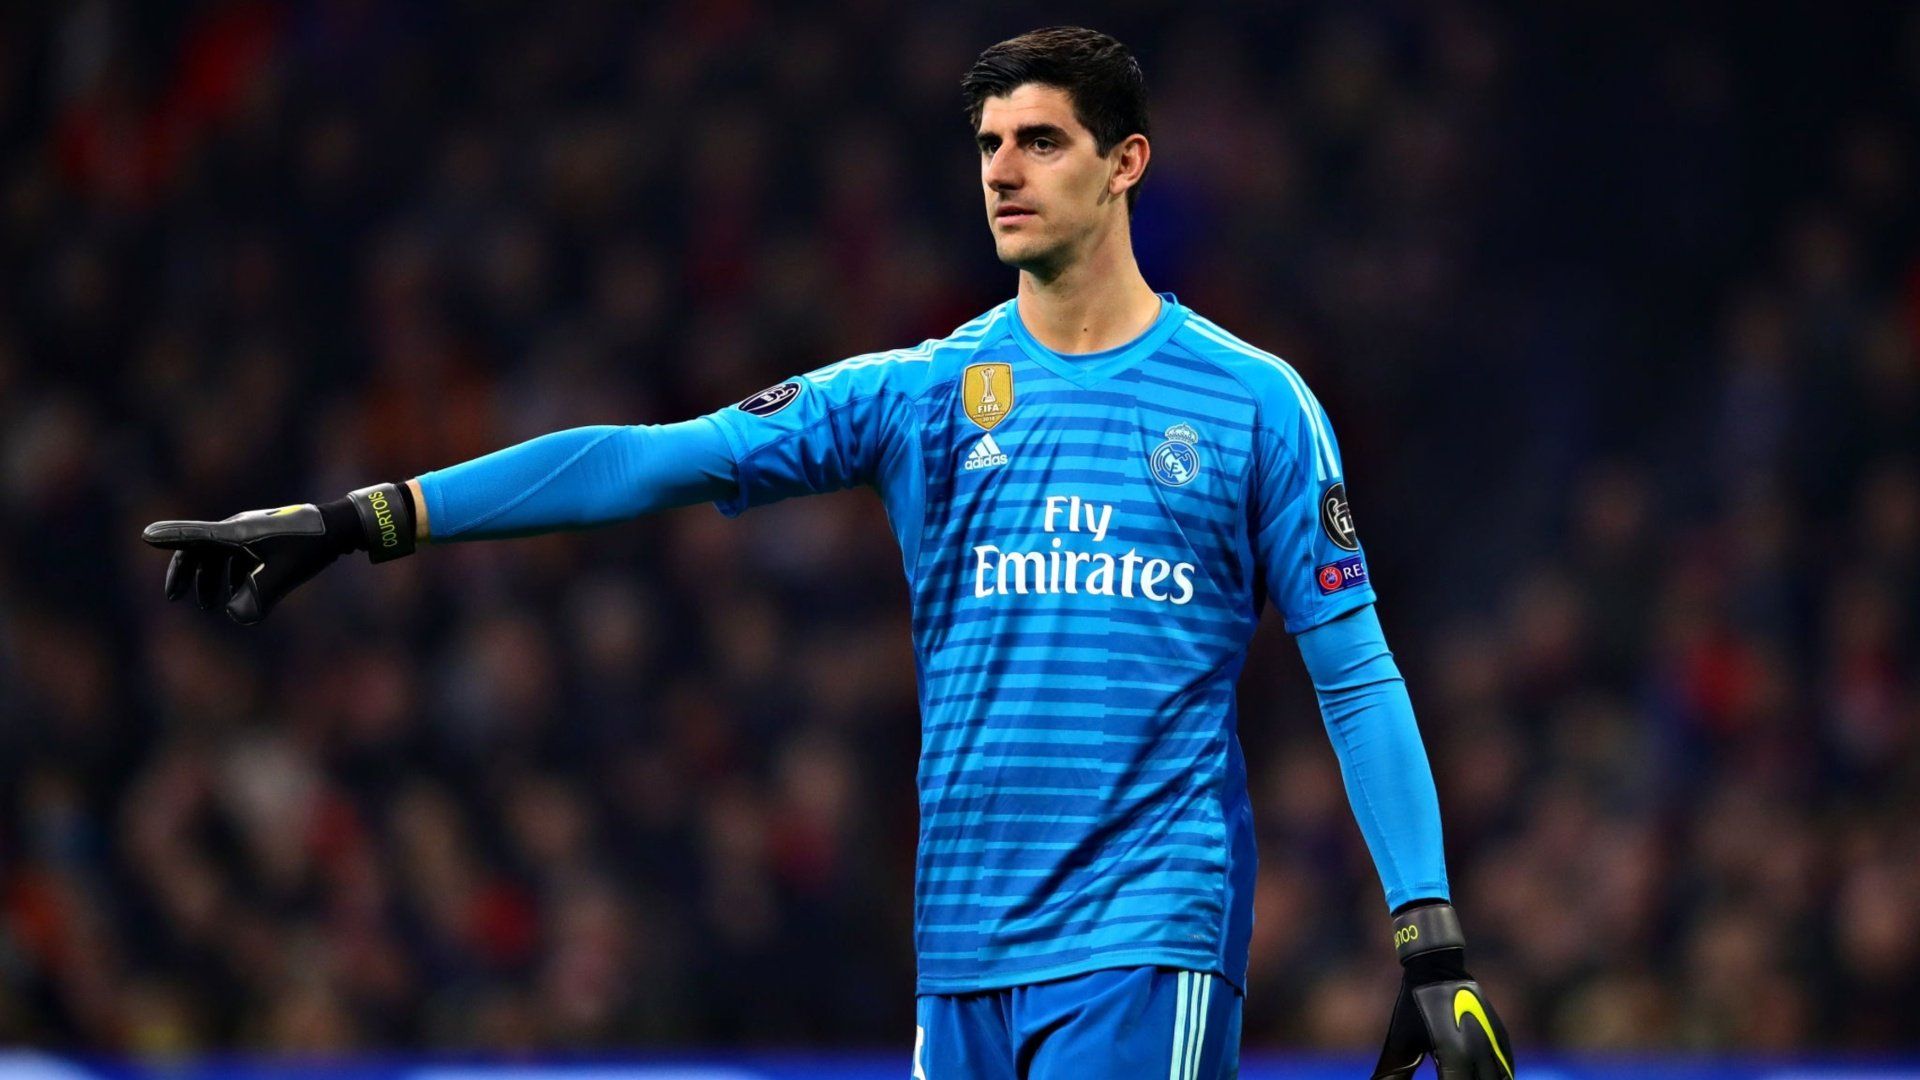 No more 25: New number for Thibaut Courtois